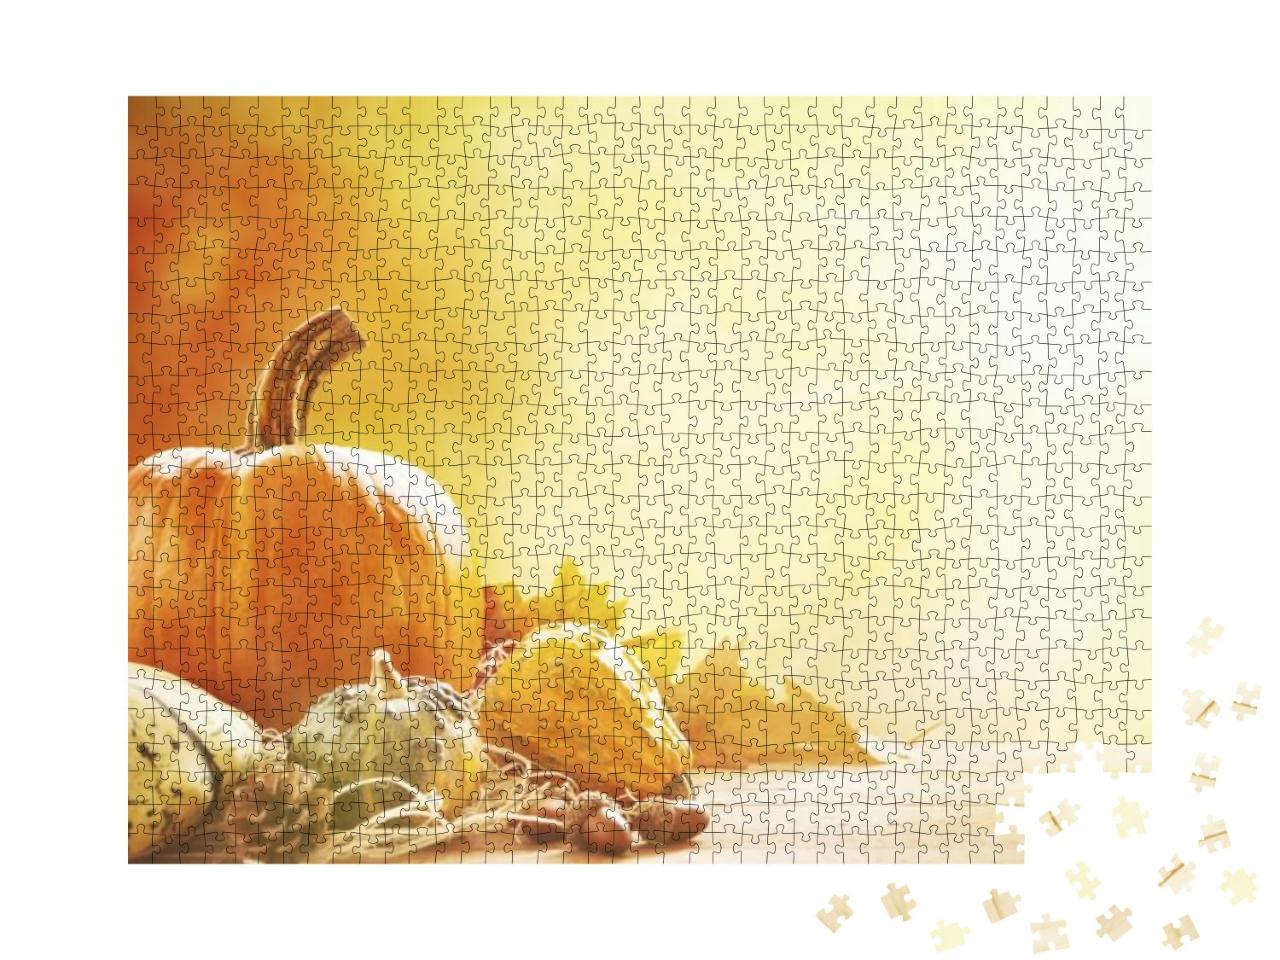 A Rustic Autumn Still Life with Pumpkins & Golden Leaves... Jigsaw Puzzle with 1000 pieces